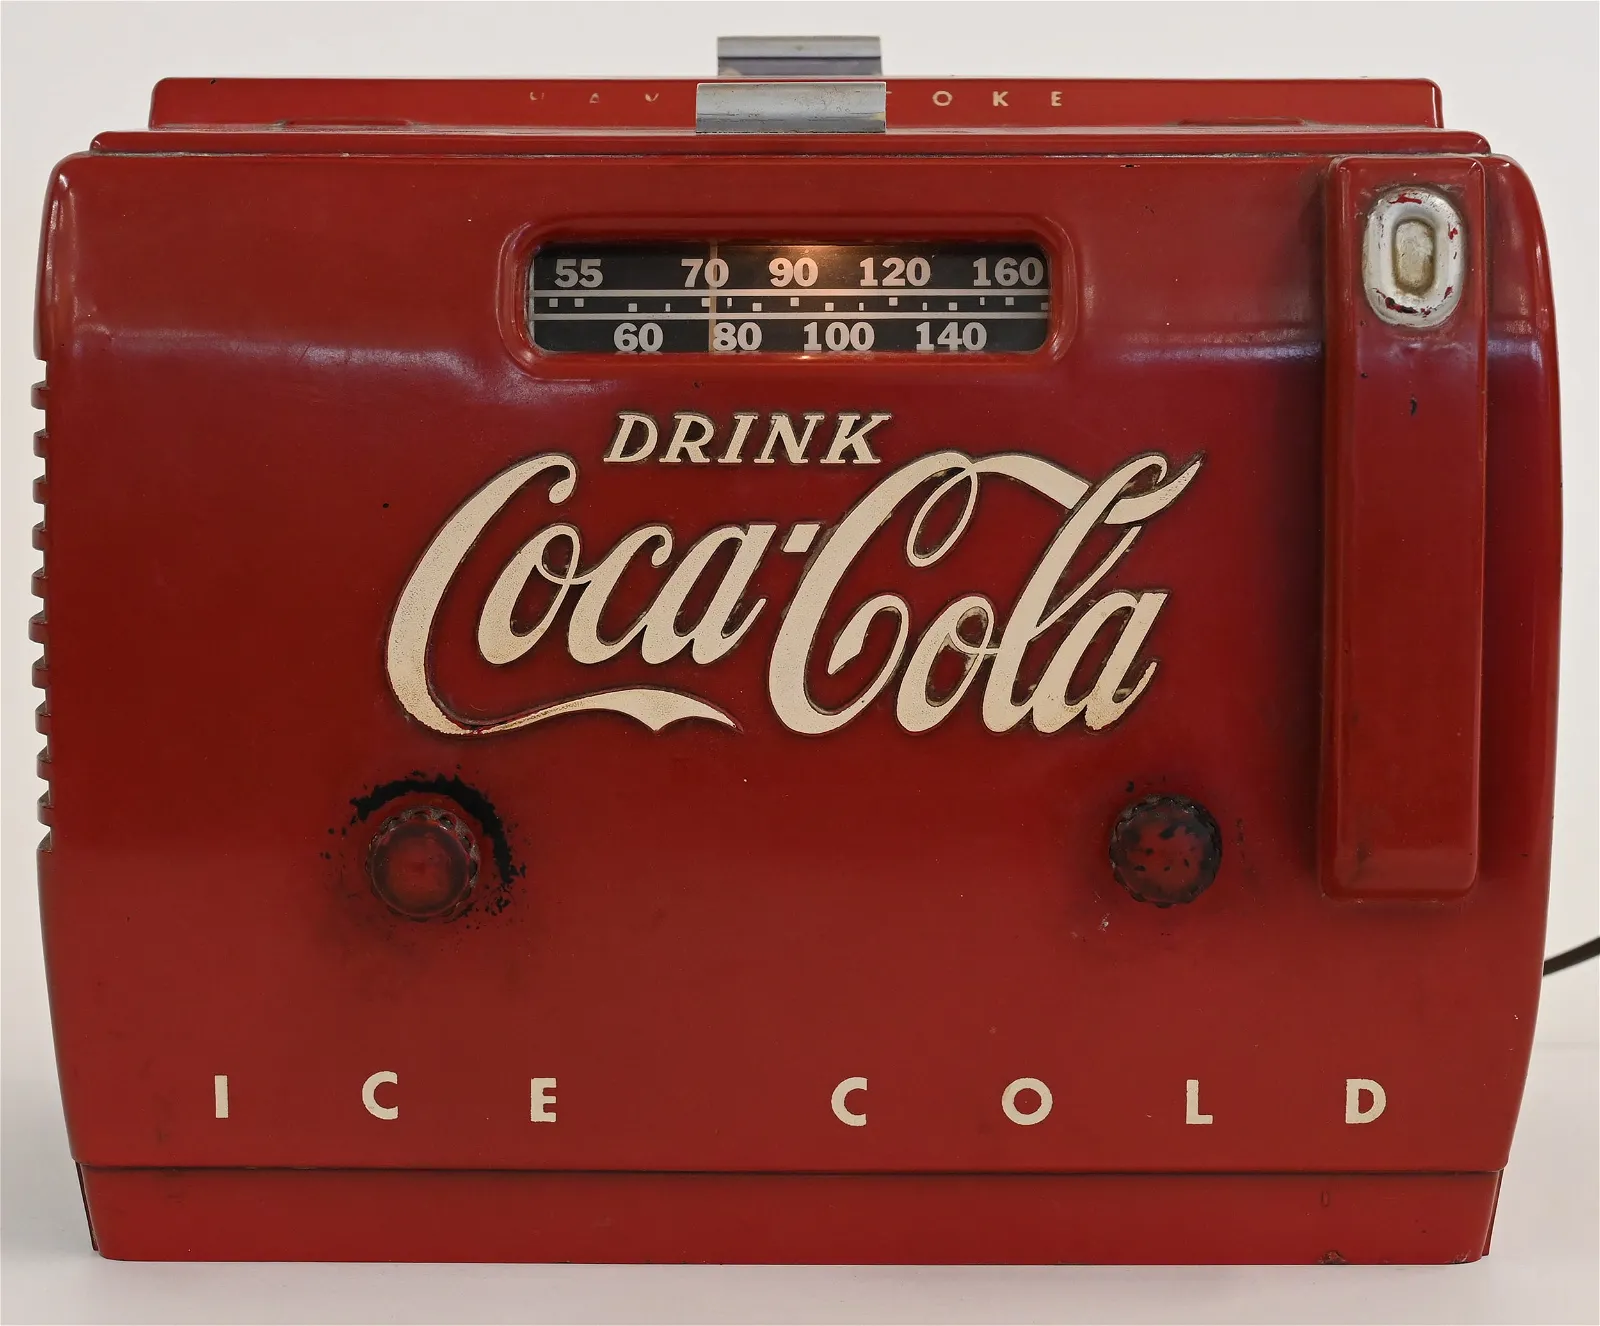 Vintage Coca-Cola collectibles hit the spot at Woody Auction Oct. 28